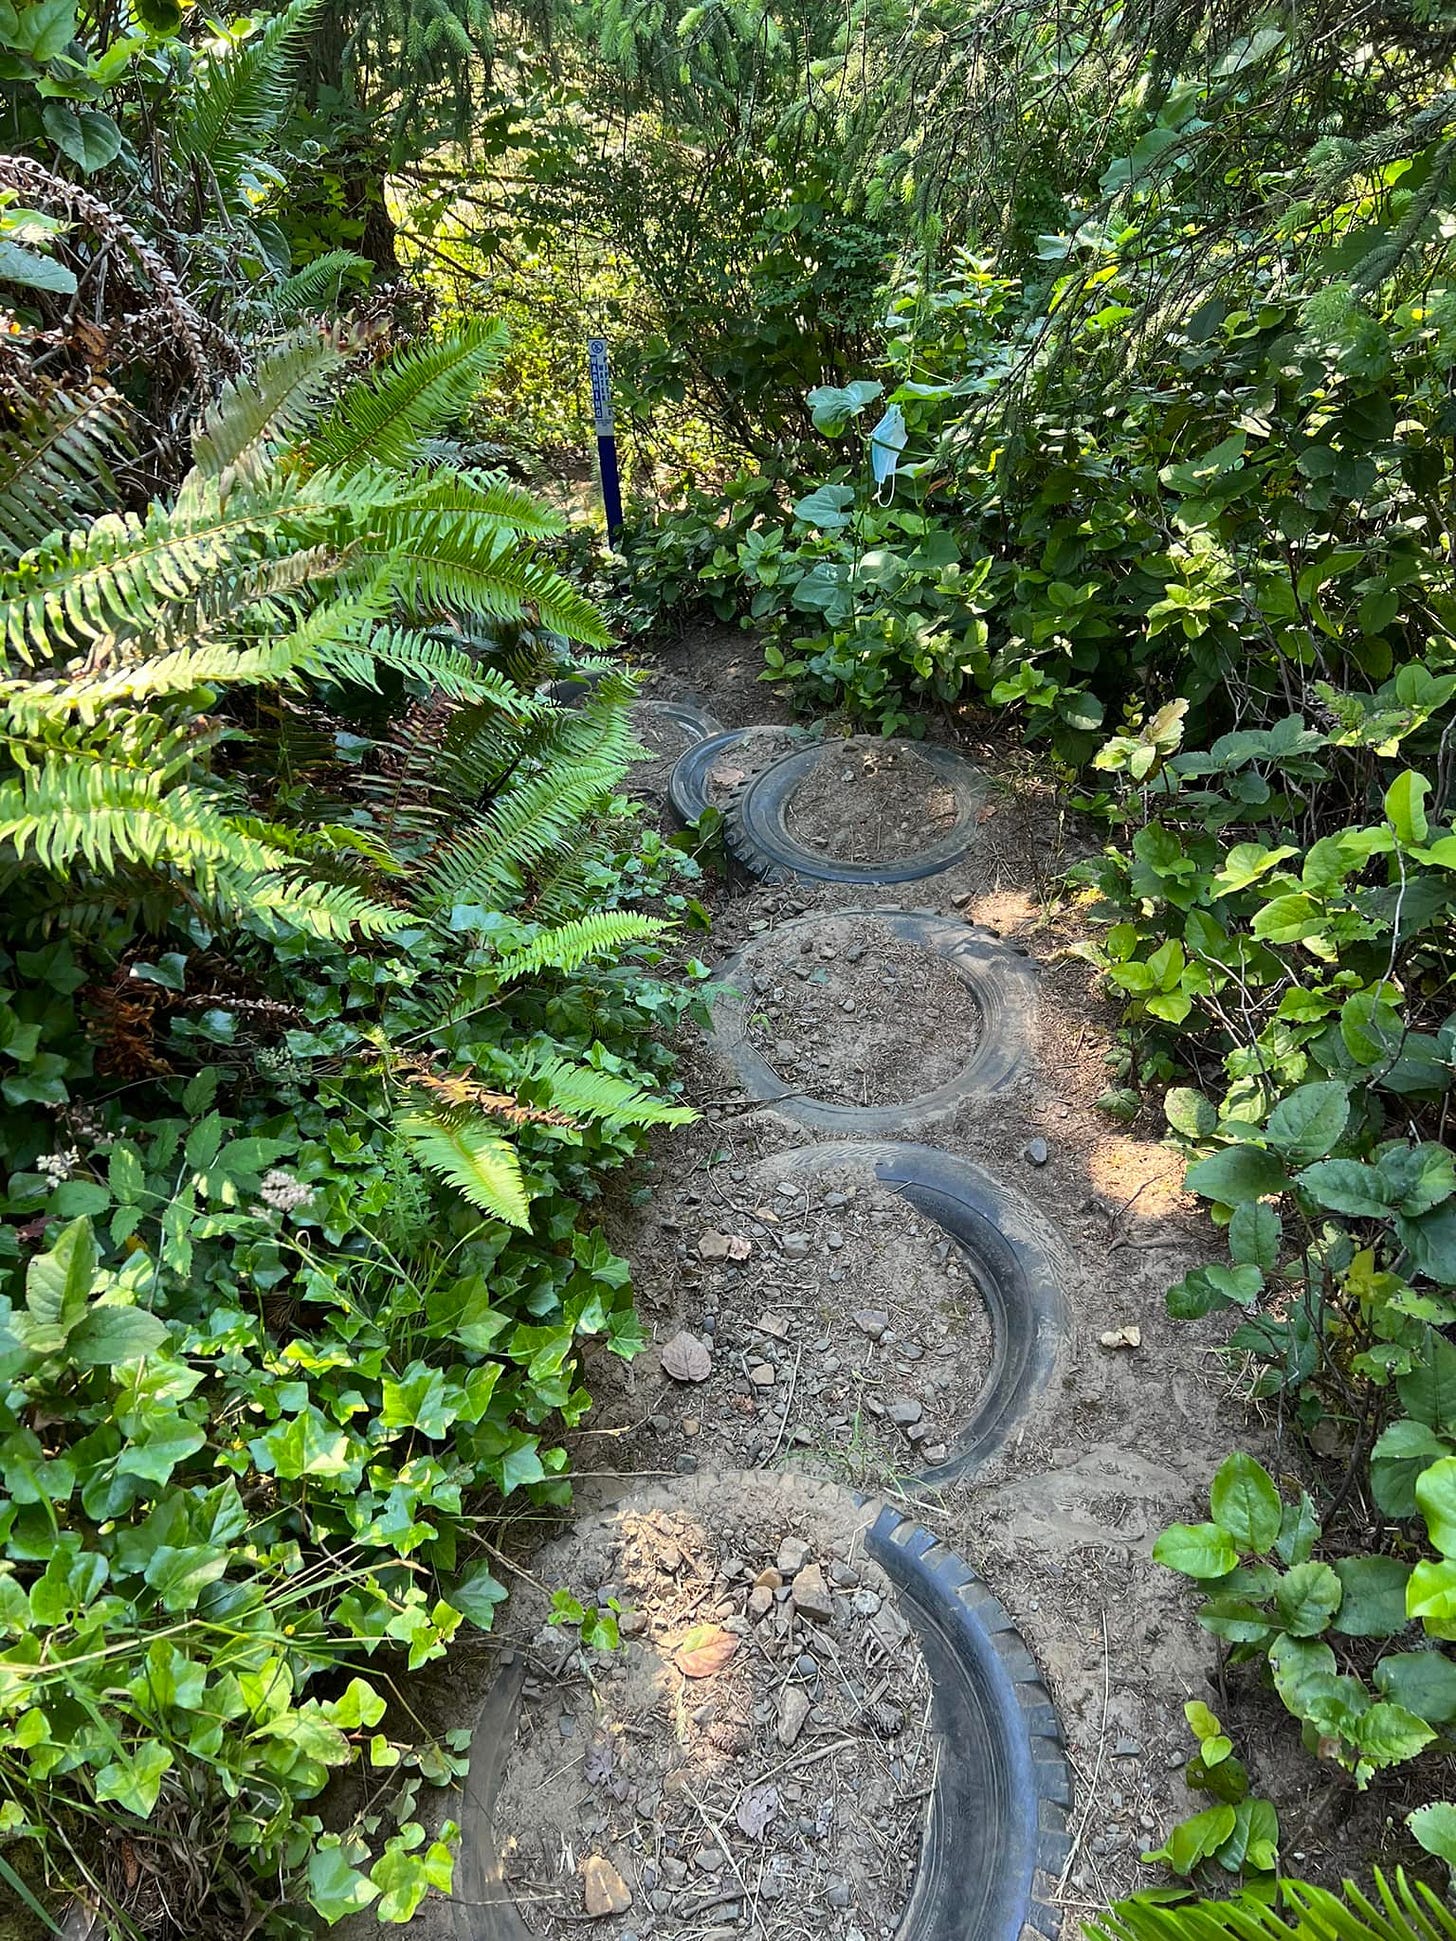 A trail with a foundation of old tires embedded in the dirt surrounded by a verdant landscape, leading down a steep hill